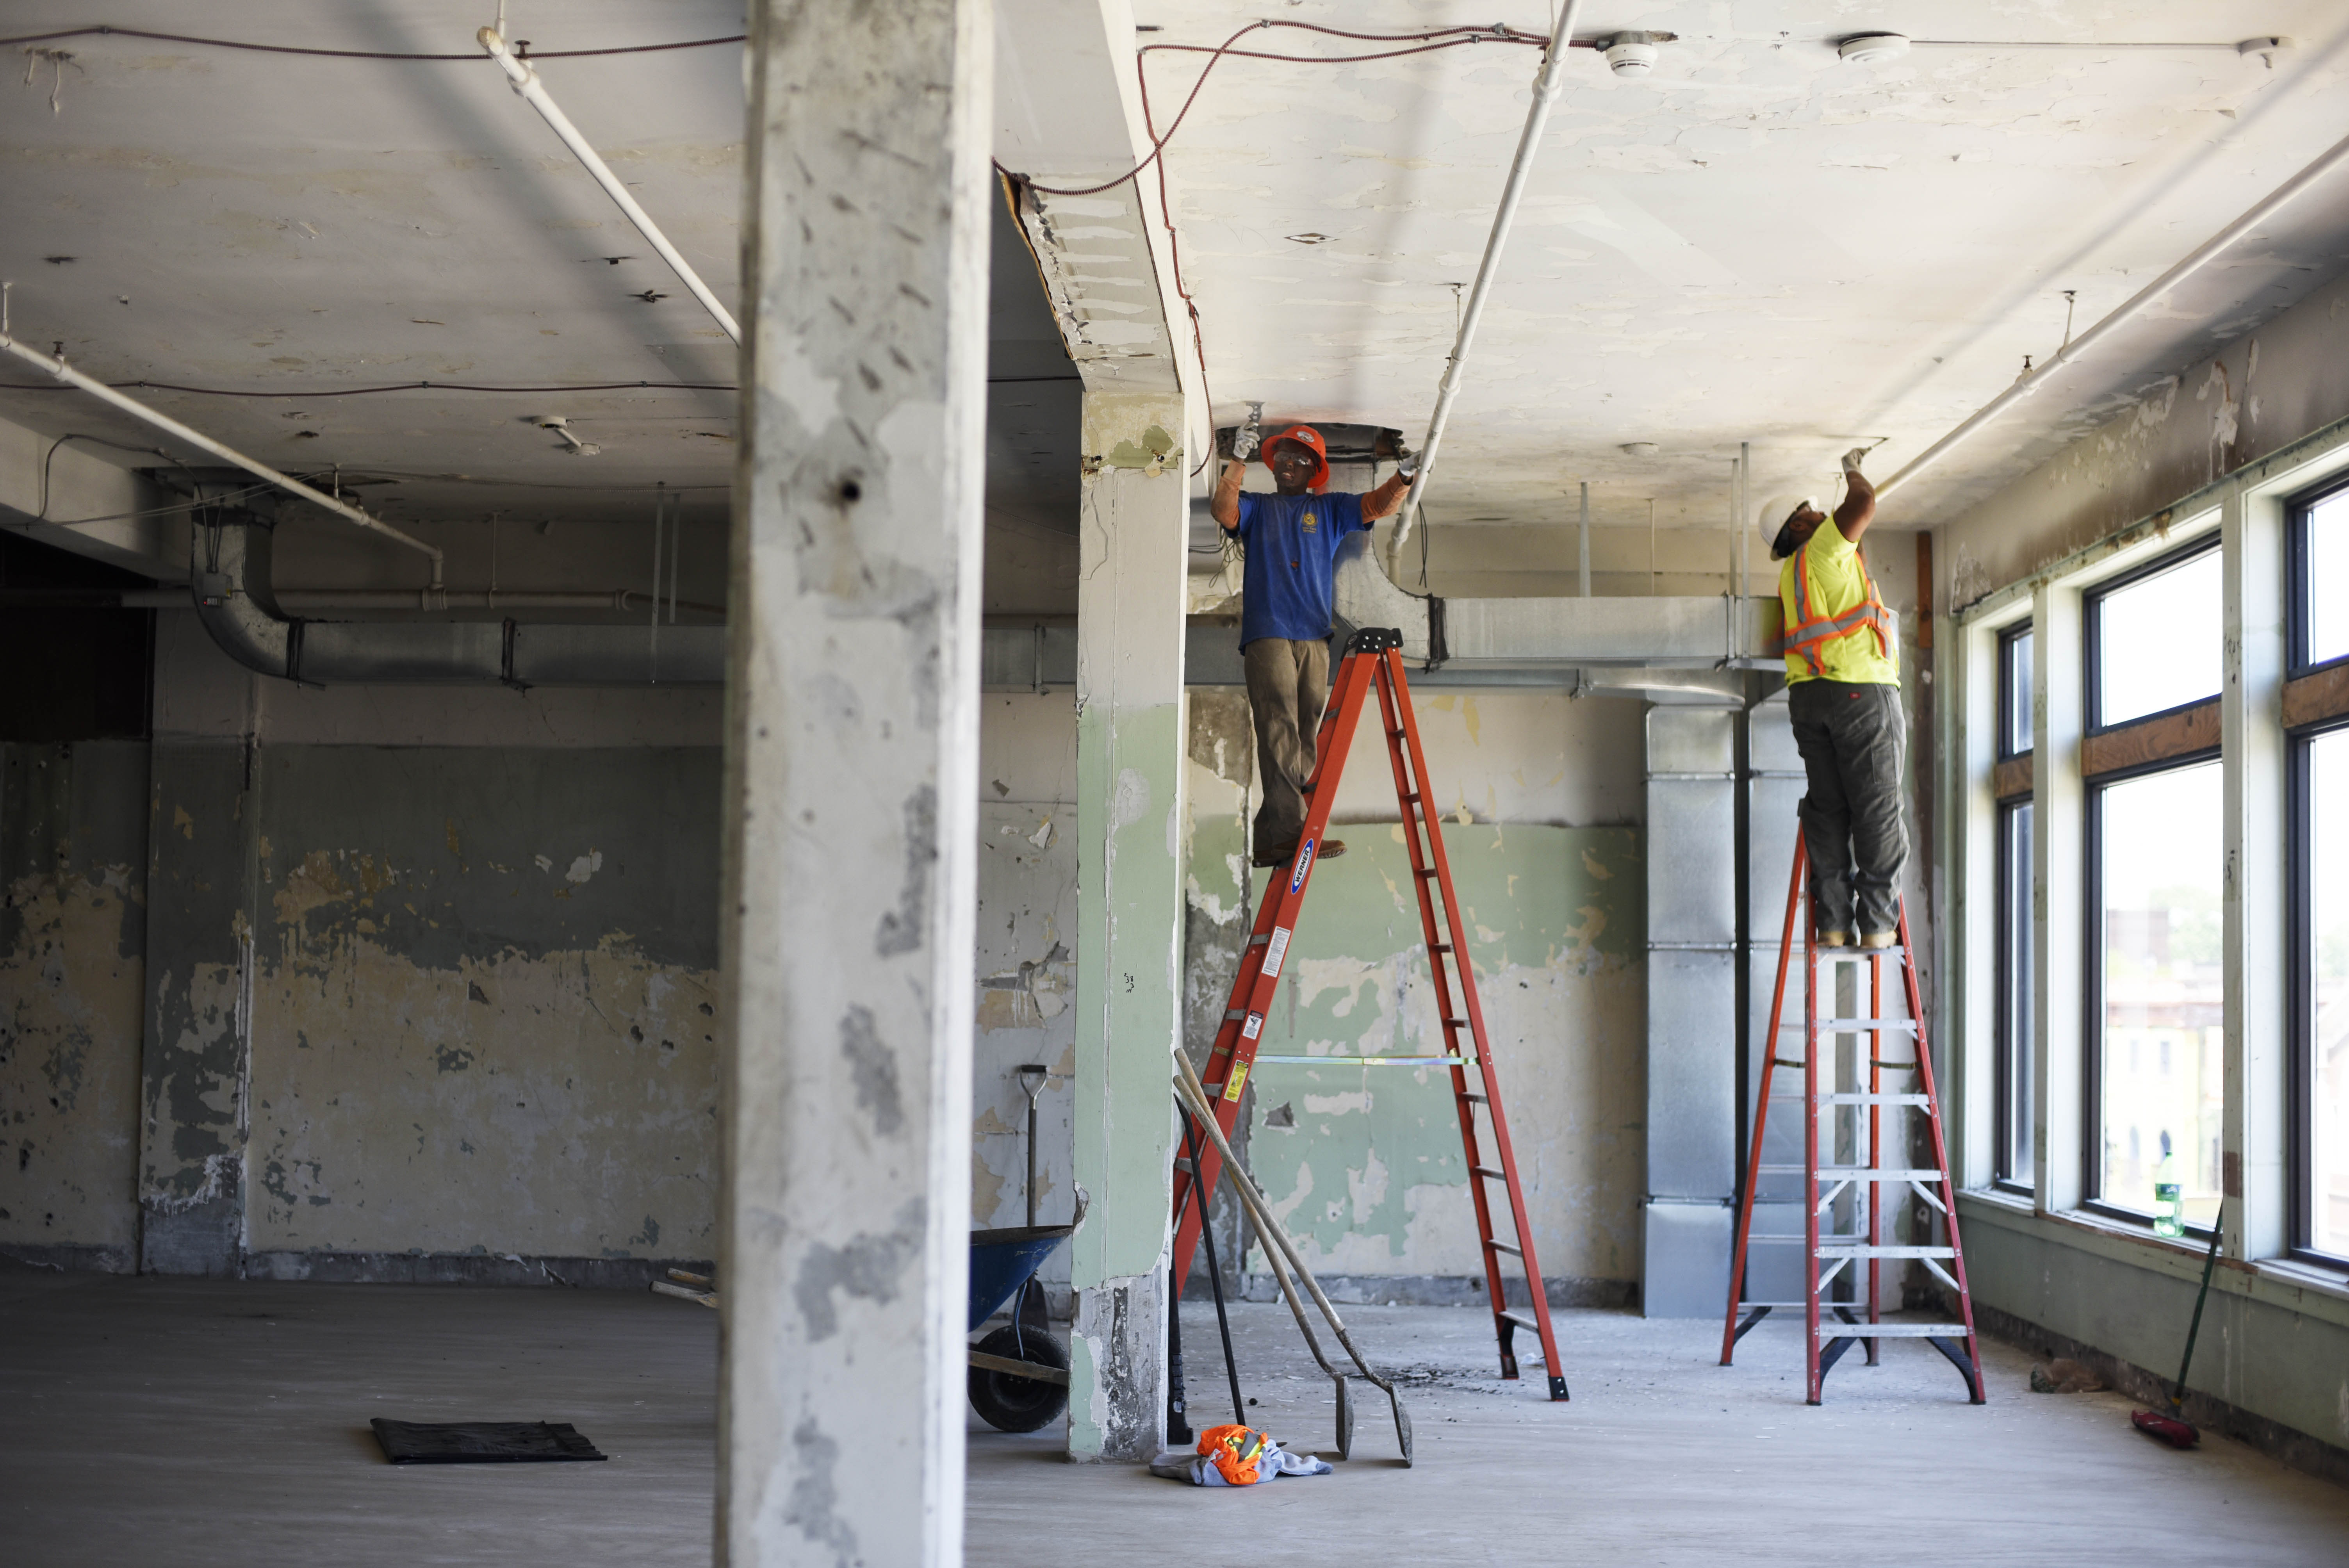 A small crew scrapes paint off the ceiling during the first day of construction on The Adeline Graham Theatrical Training and Innovation Center at Proctors, nicknamed The Addy, Wednesday, June 7, 2017.